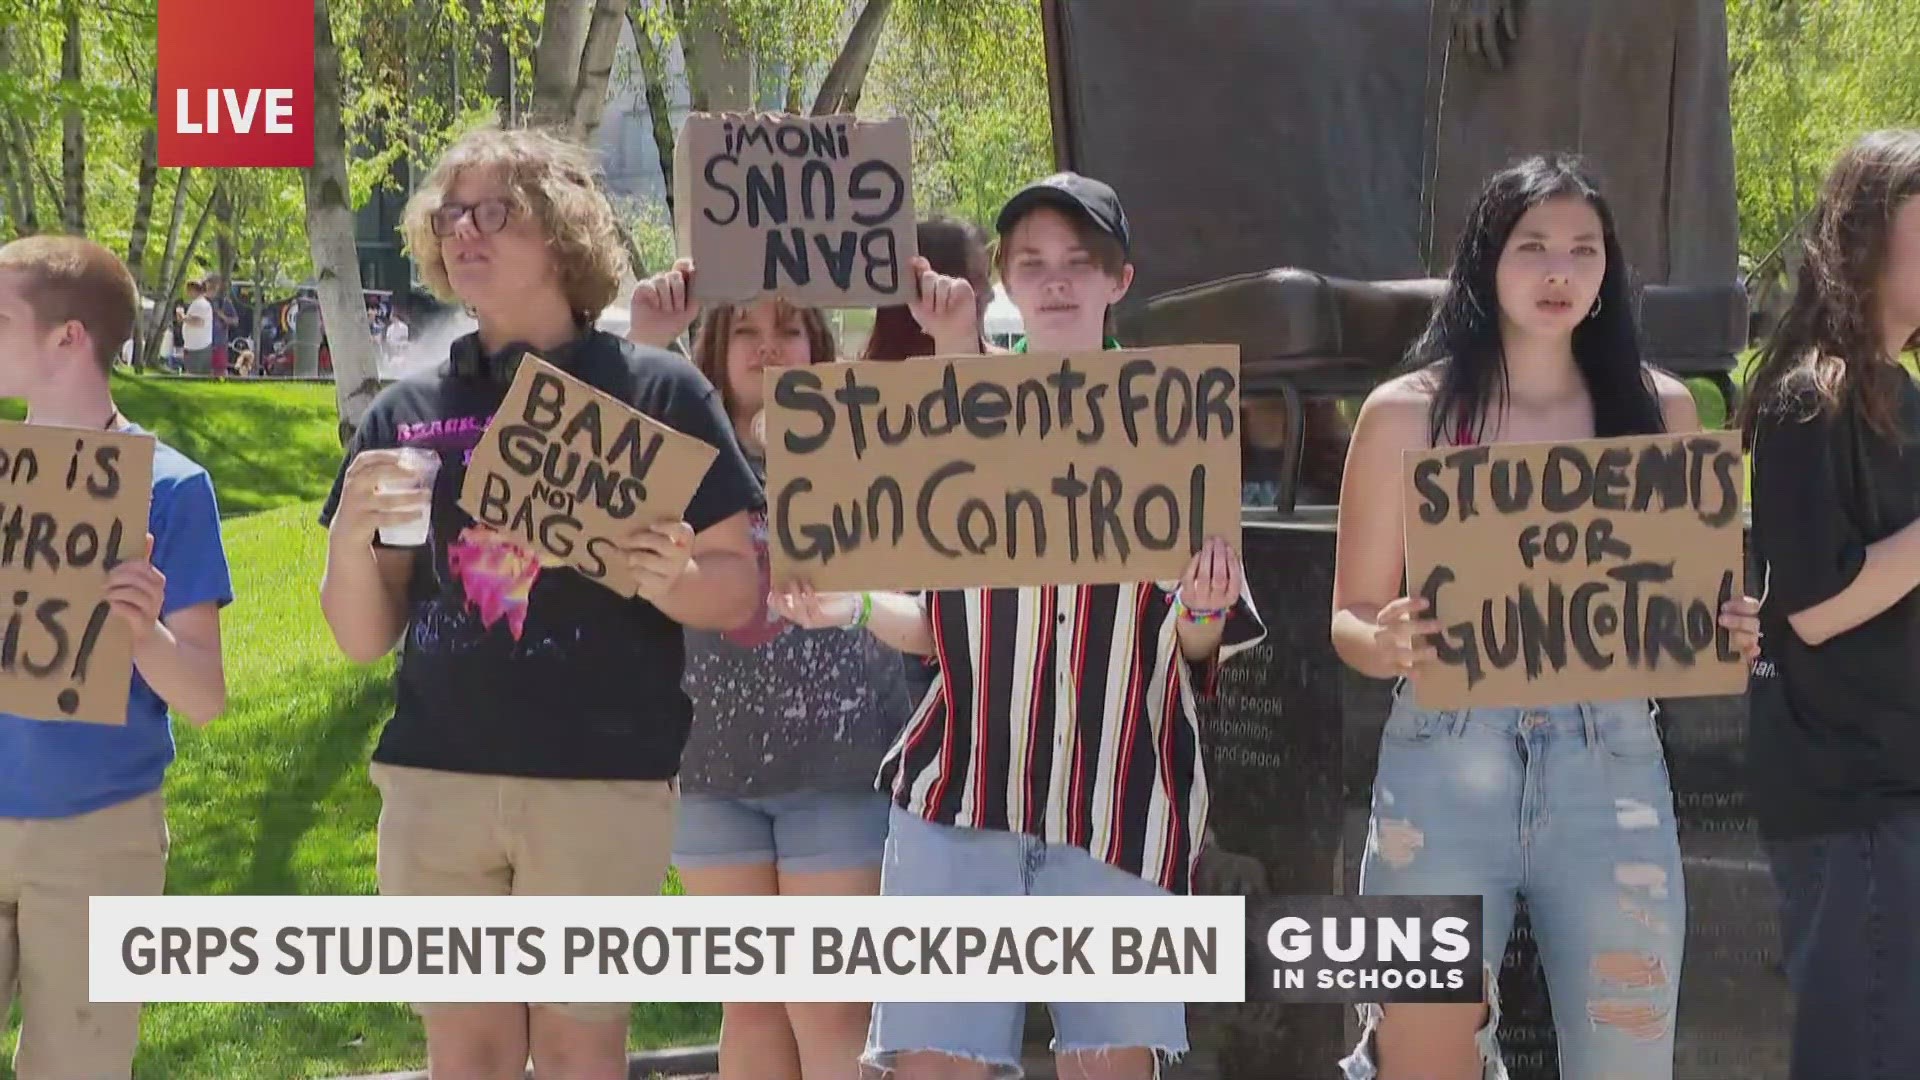 GRPS students walk out after backpack ban